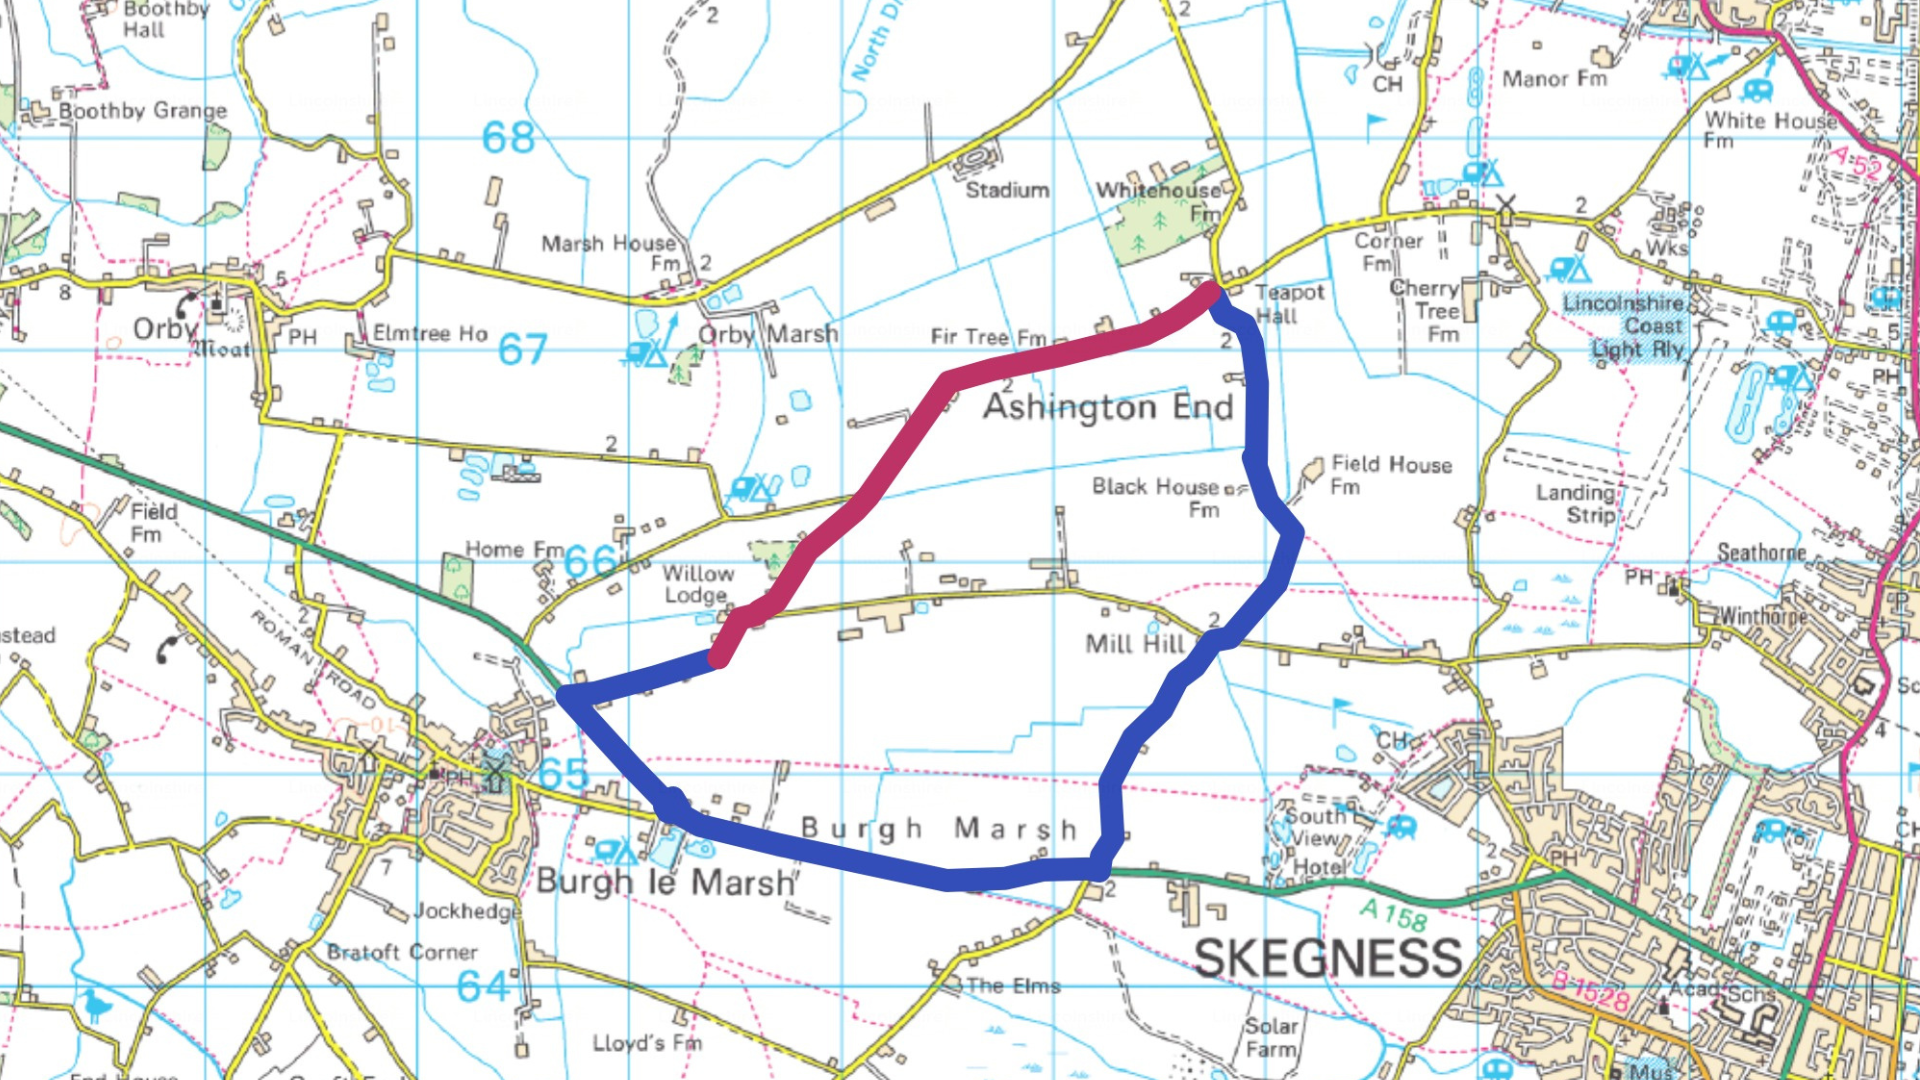 The diversion route for the resurfacing